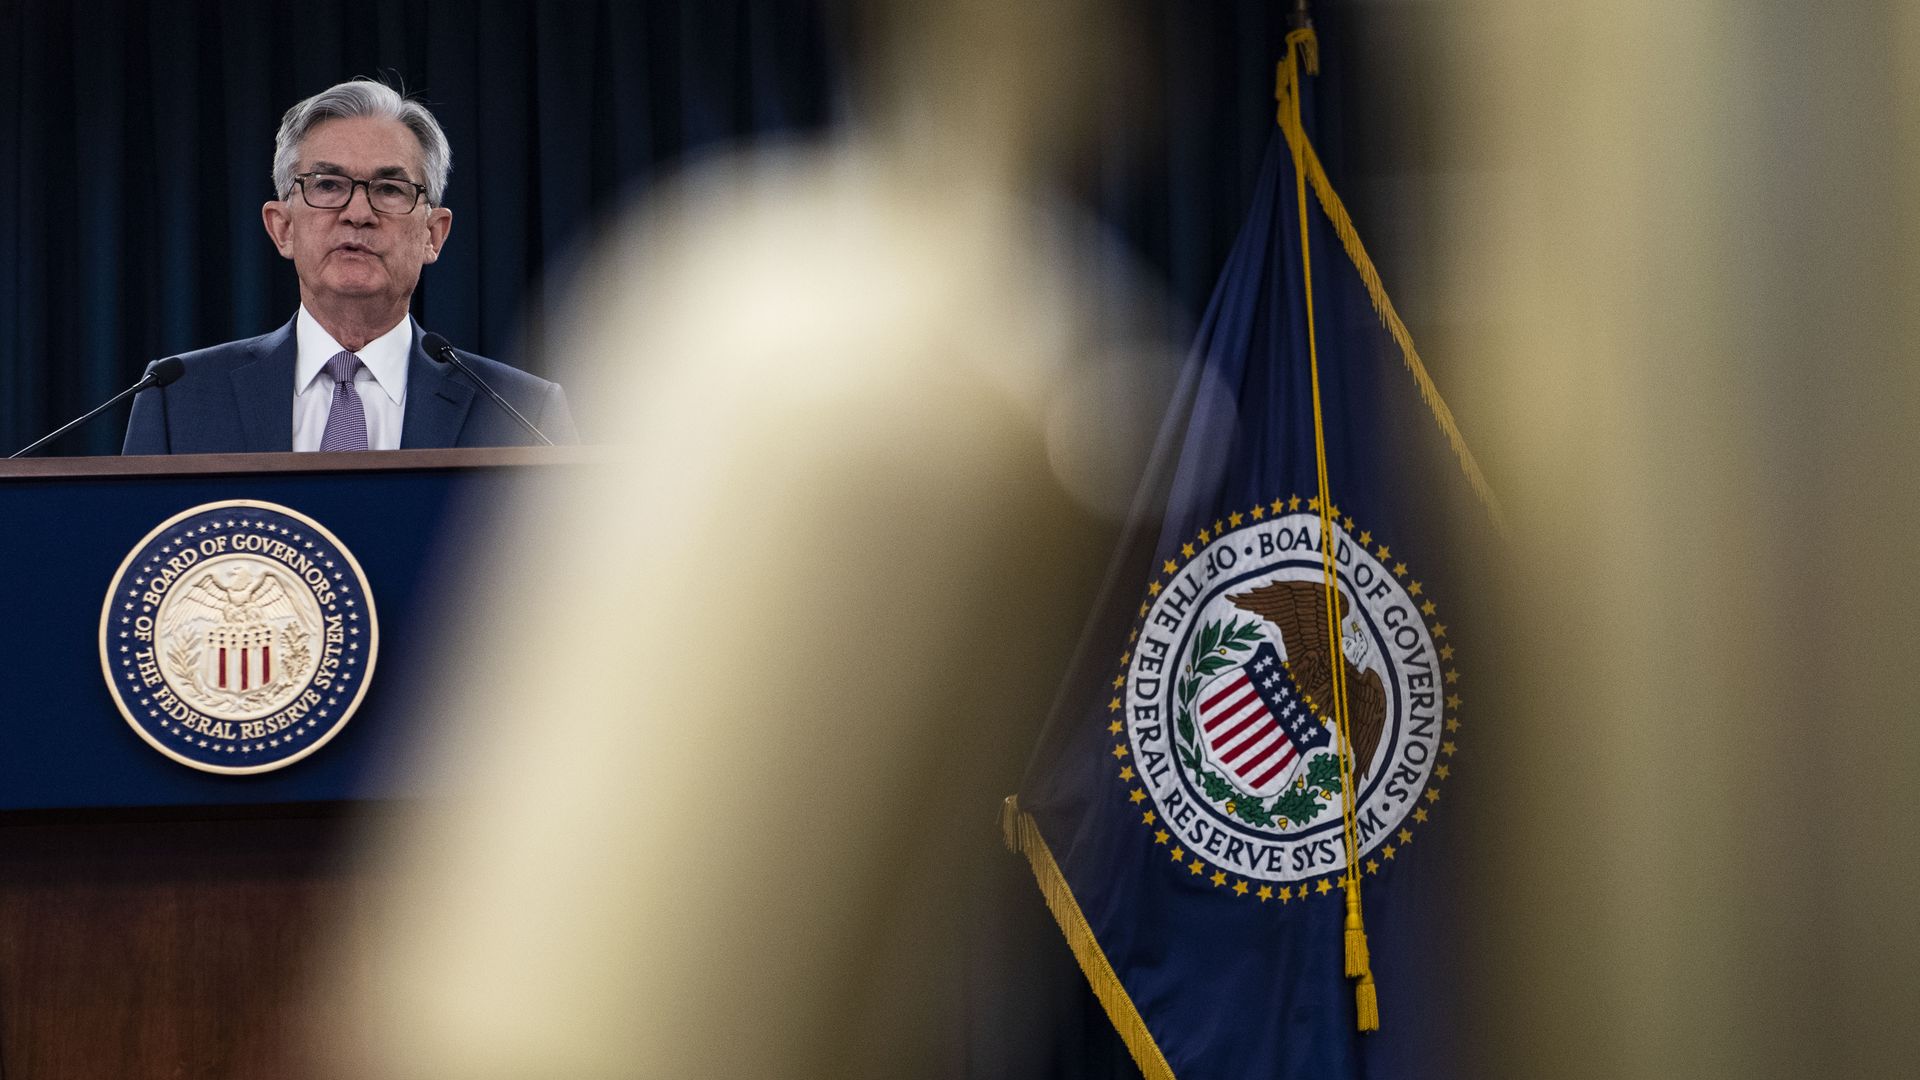 US Federal Reserve Chairman Jerome Powell gives a press briefing after the surprise announcement the FED will cut interest rates on March 3, 2020